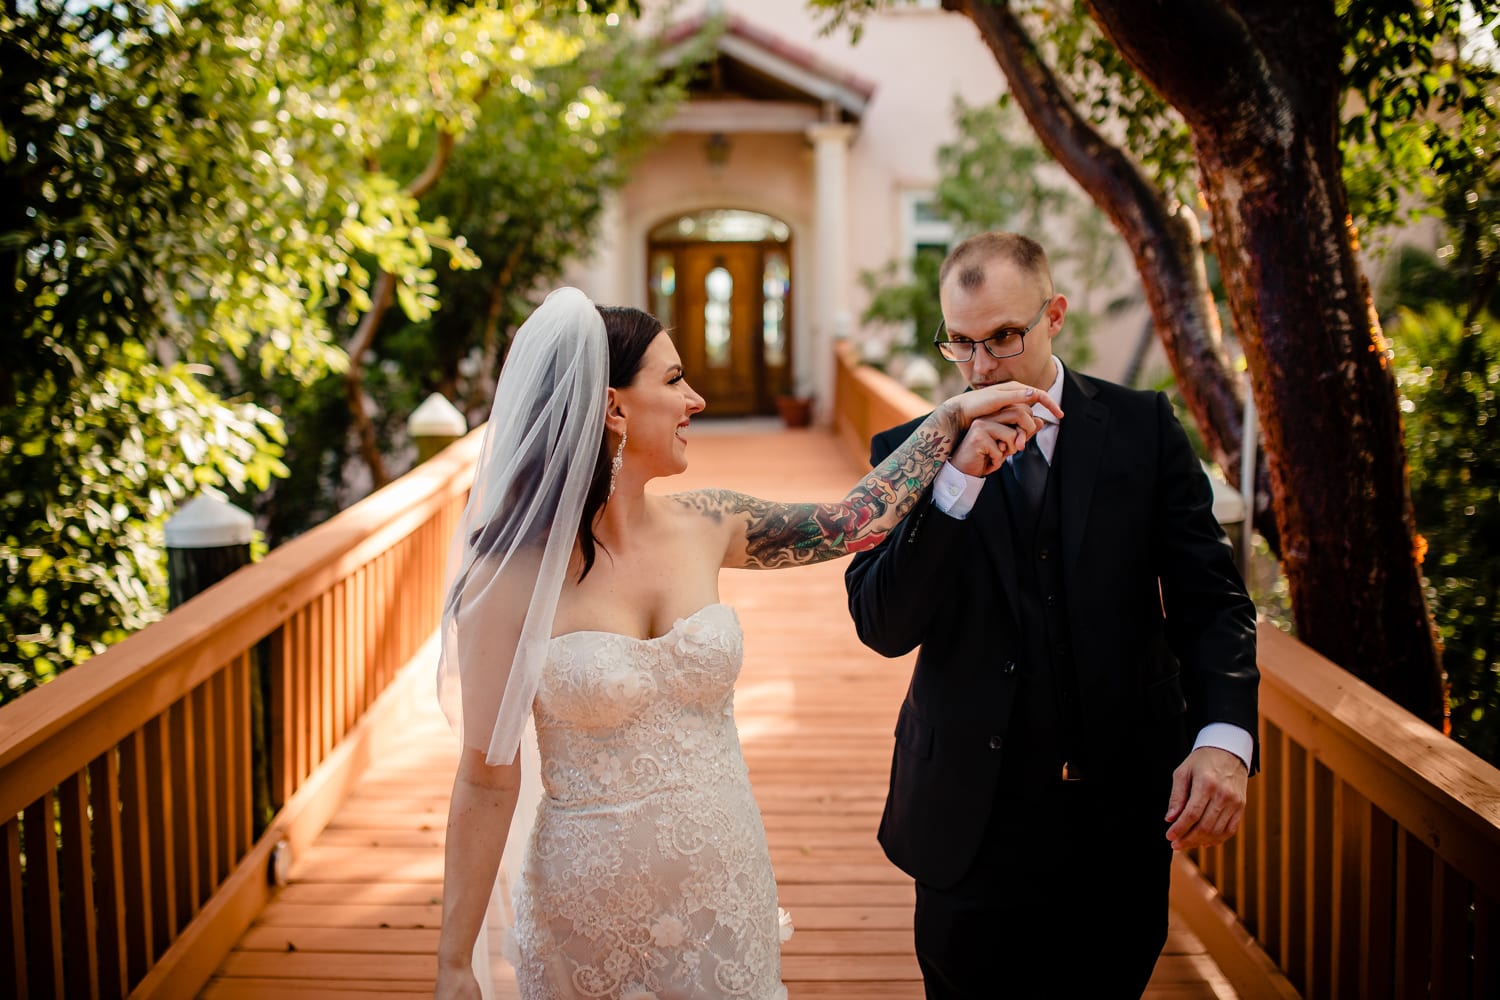 A bride and groom standing on a wooden bridge at a Hemingway home wedding.